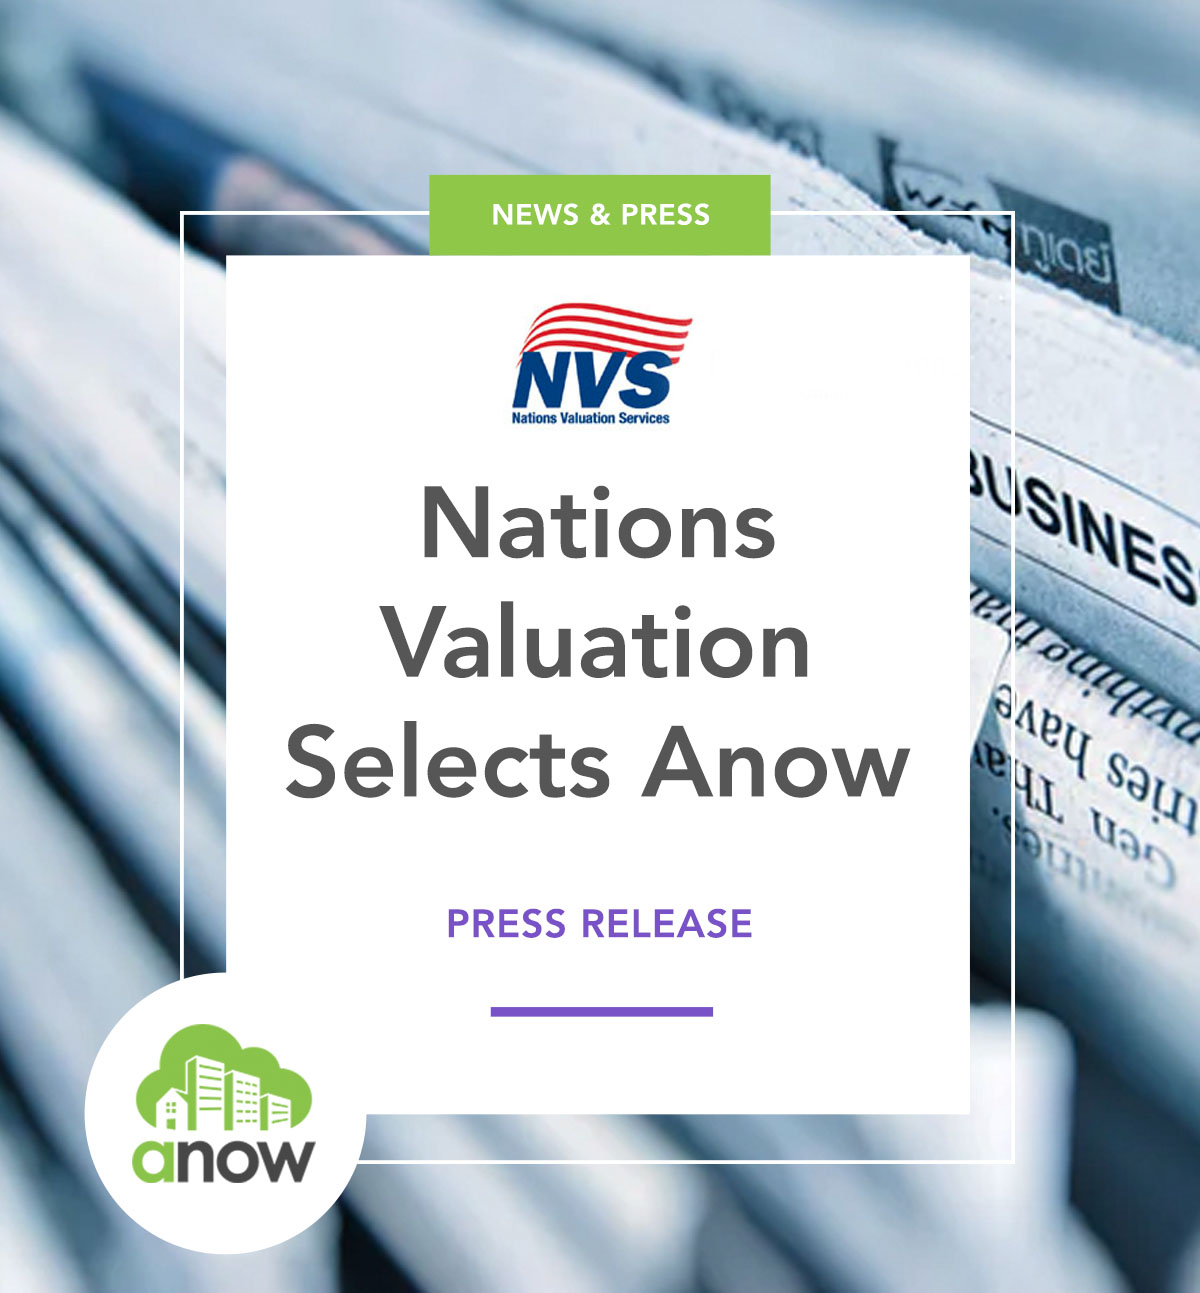 Nations Valuation Selects Anow